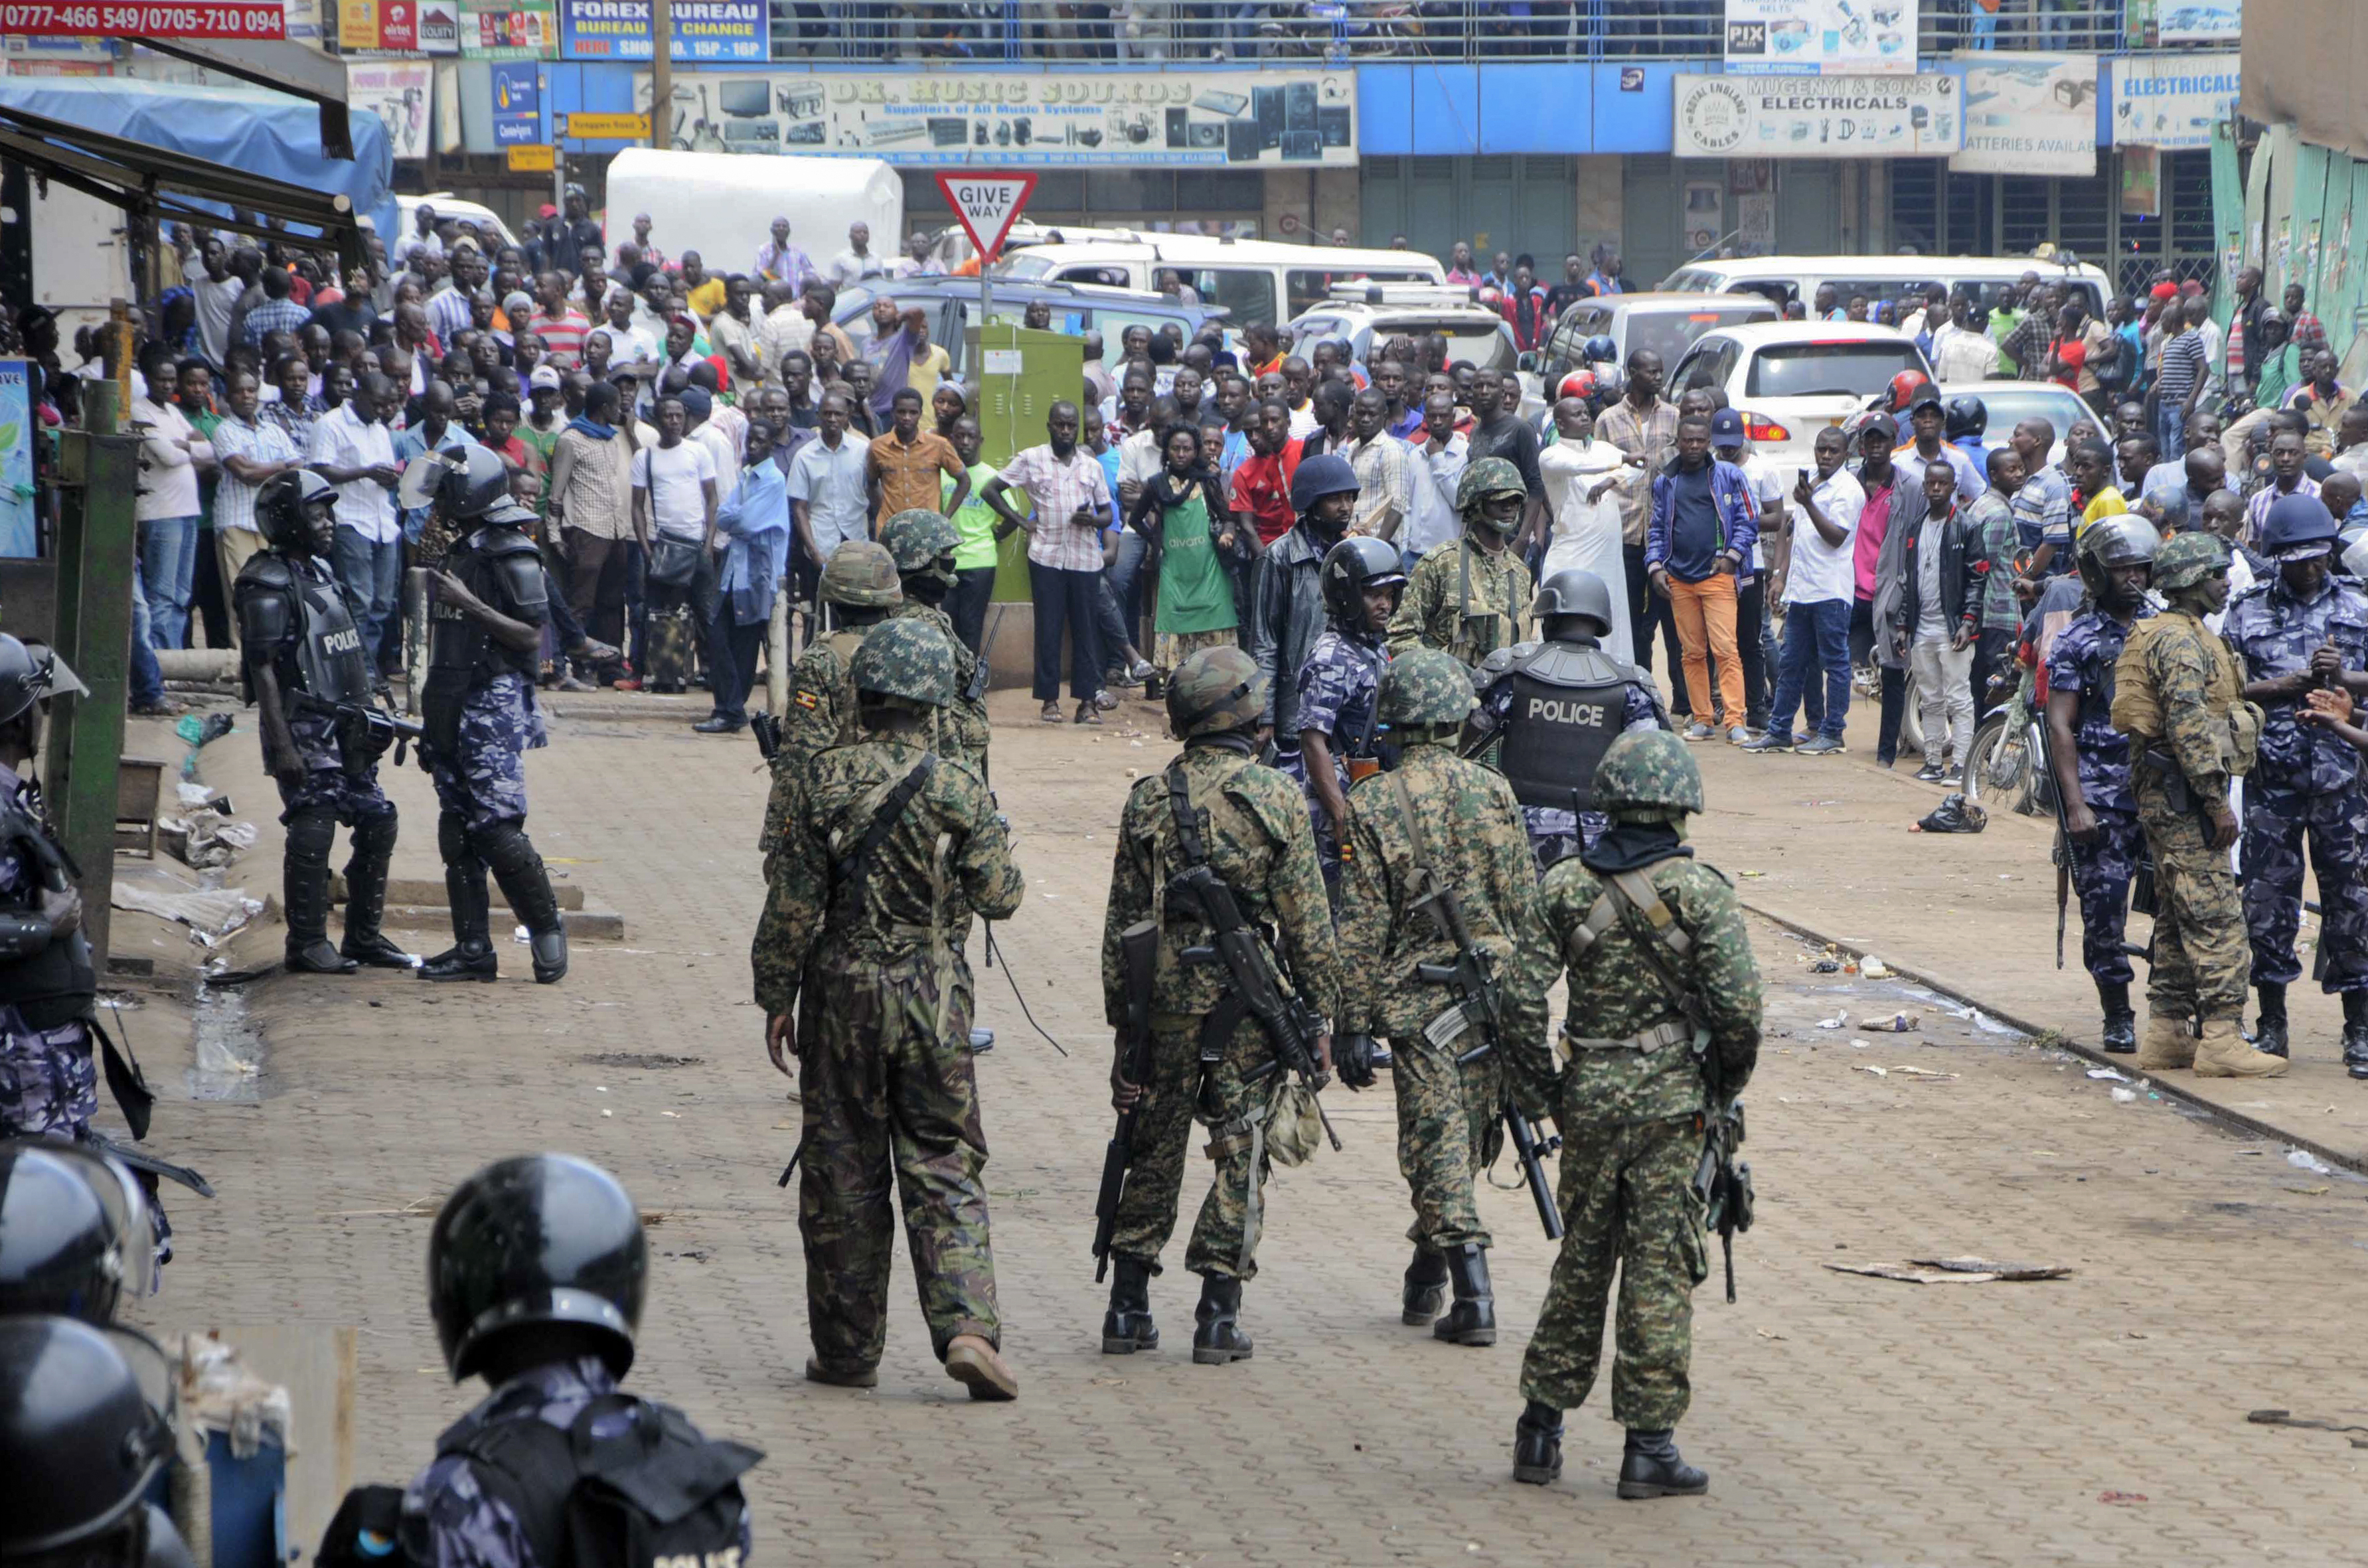 Ugandan army soldiers stand in front of a crowd during protests